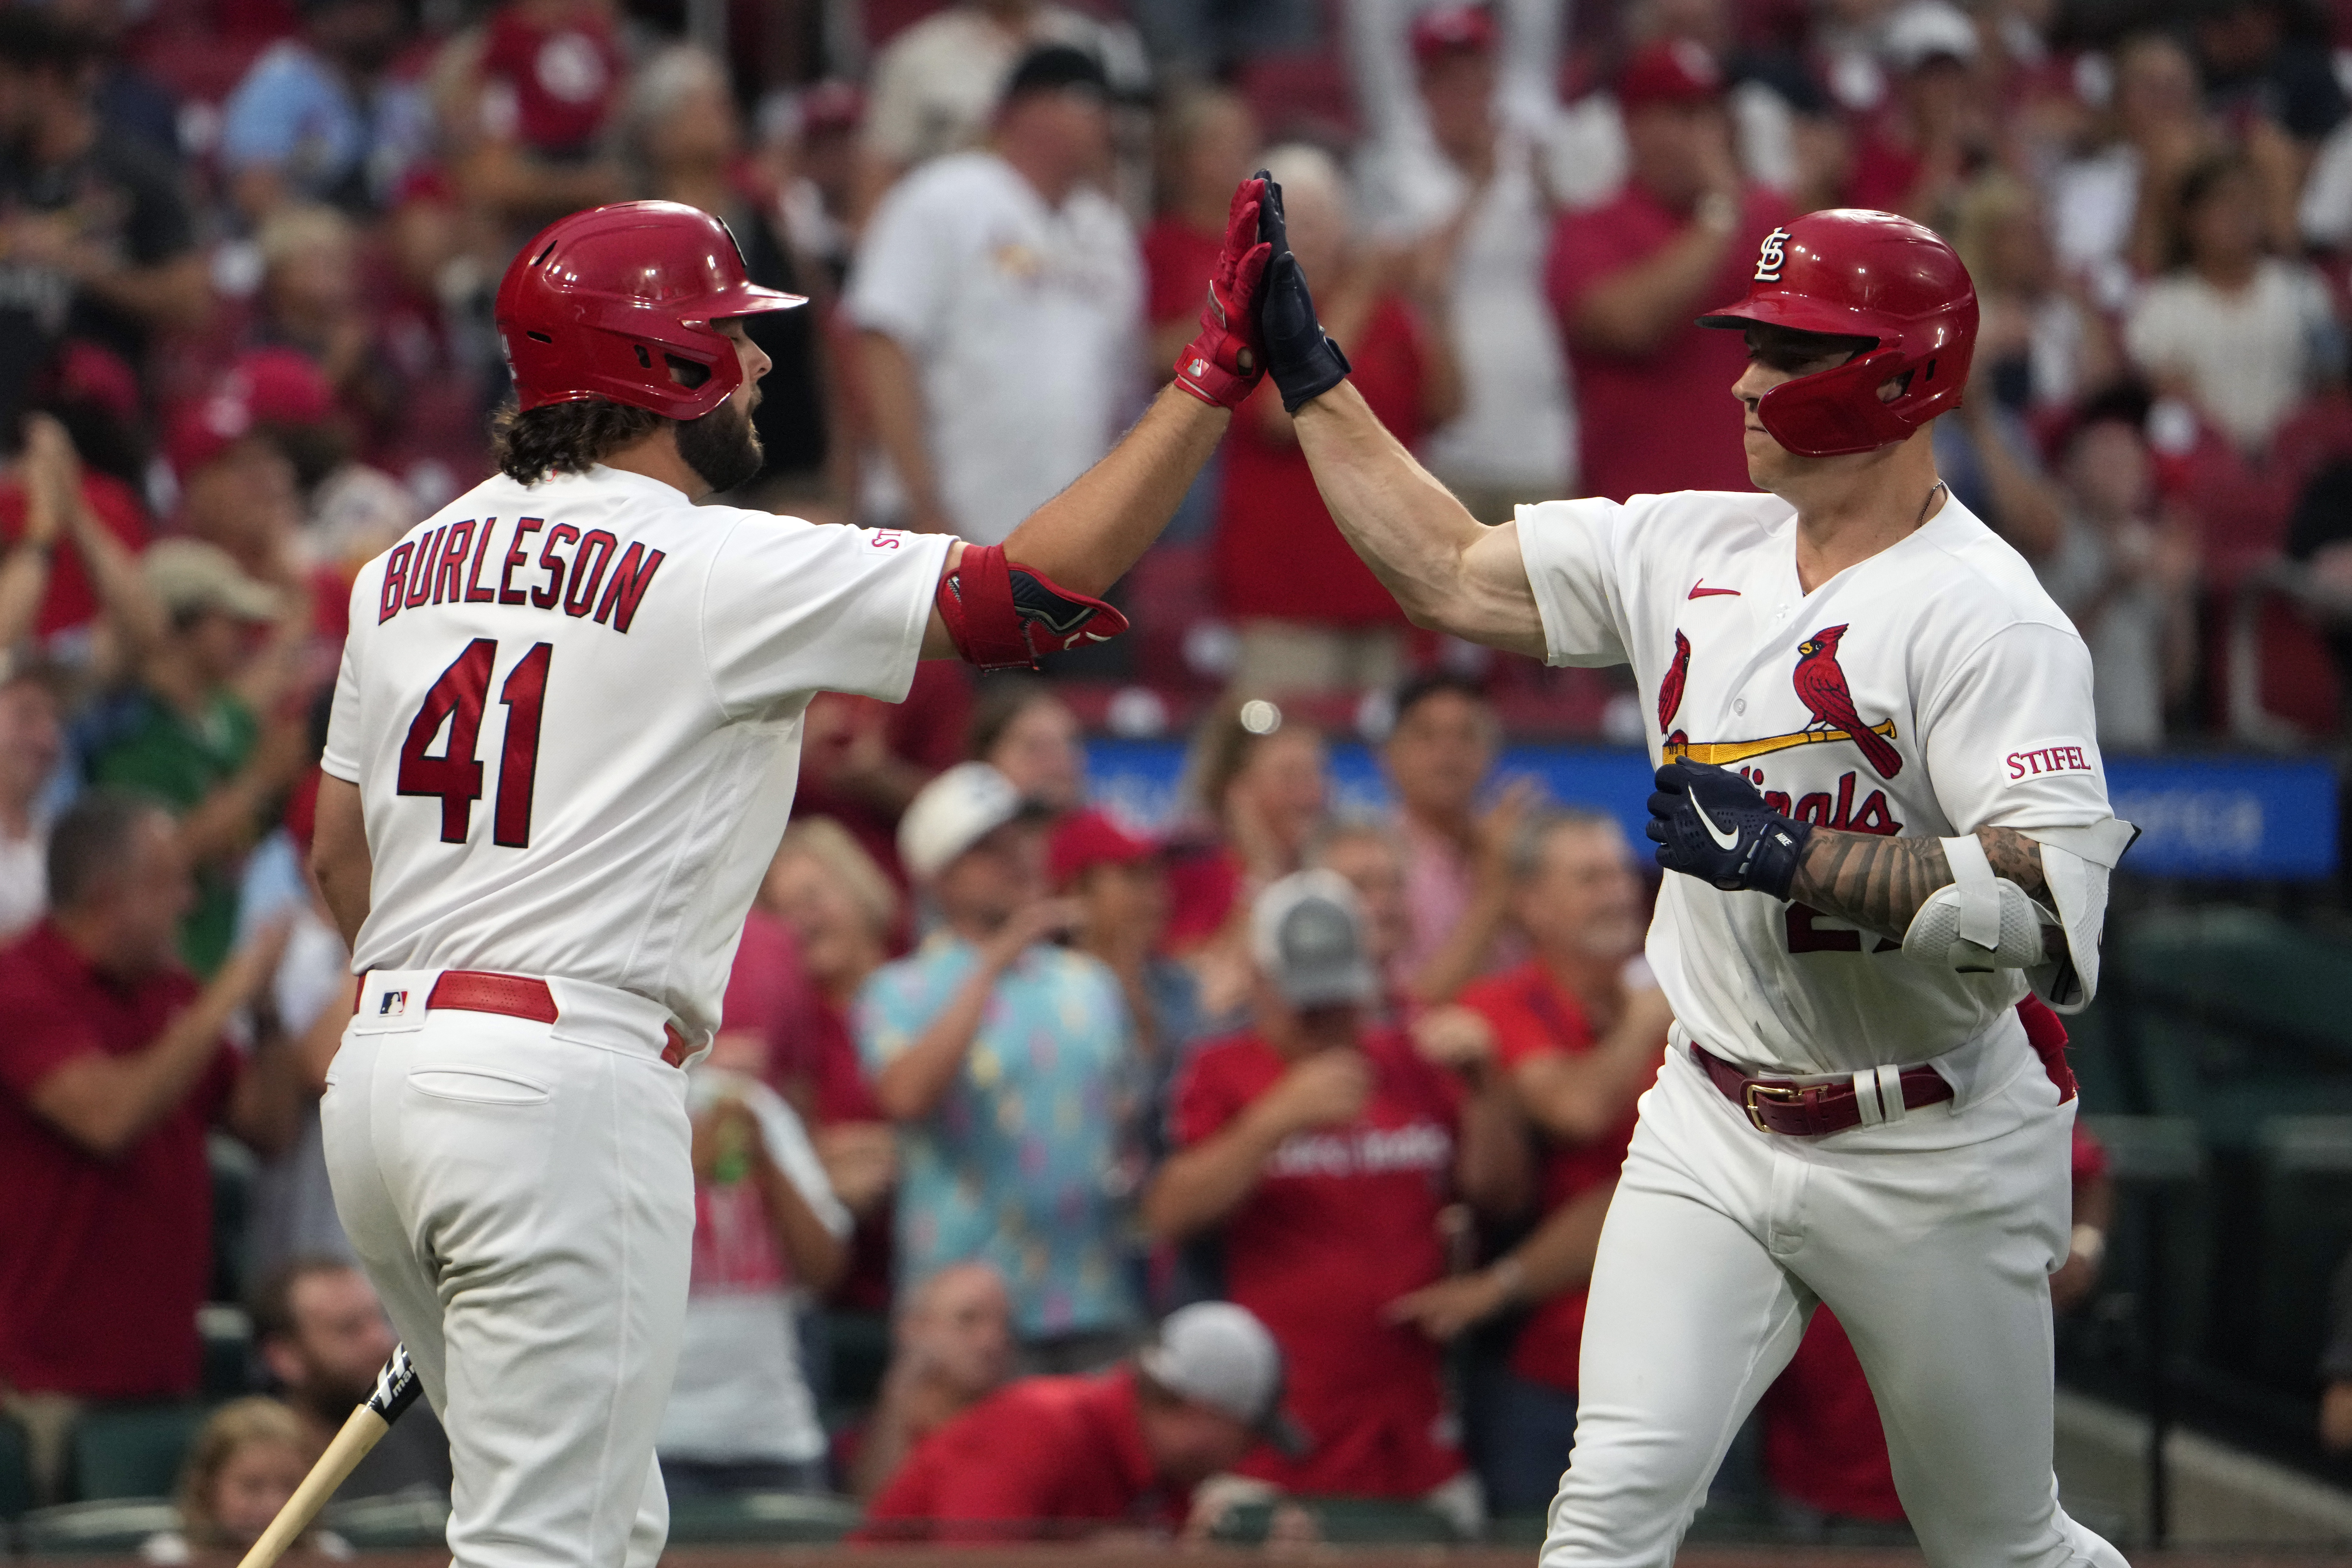 Hudson works 7 strong innings and the Cardinals hit 4 HRs in win